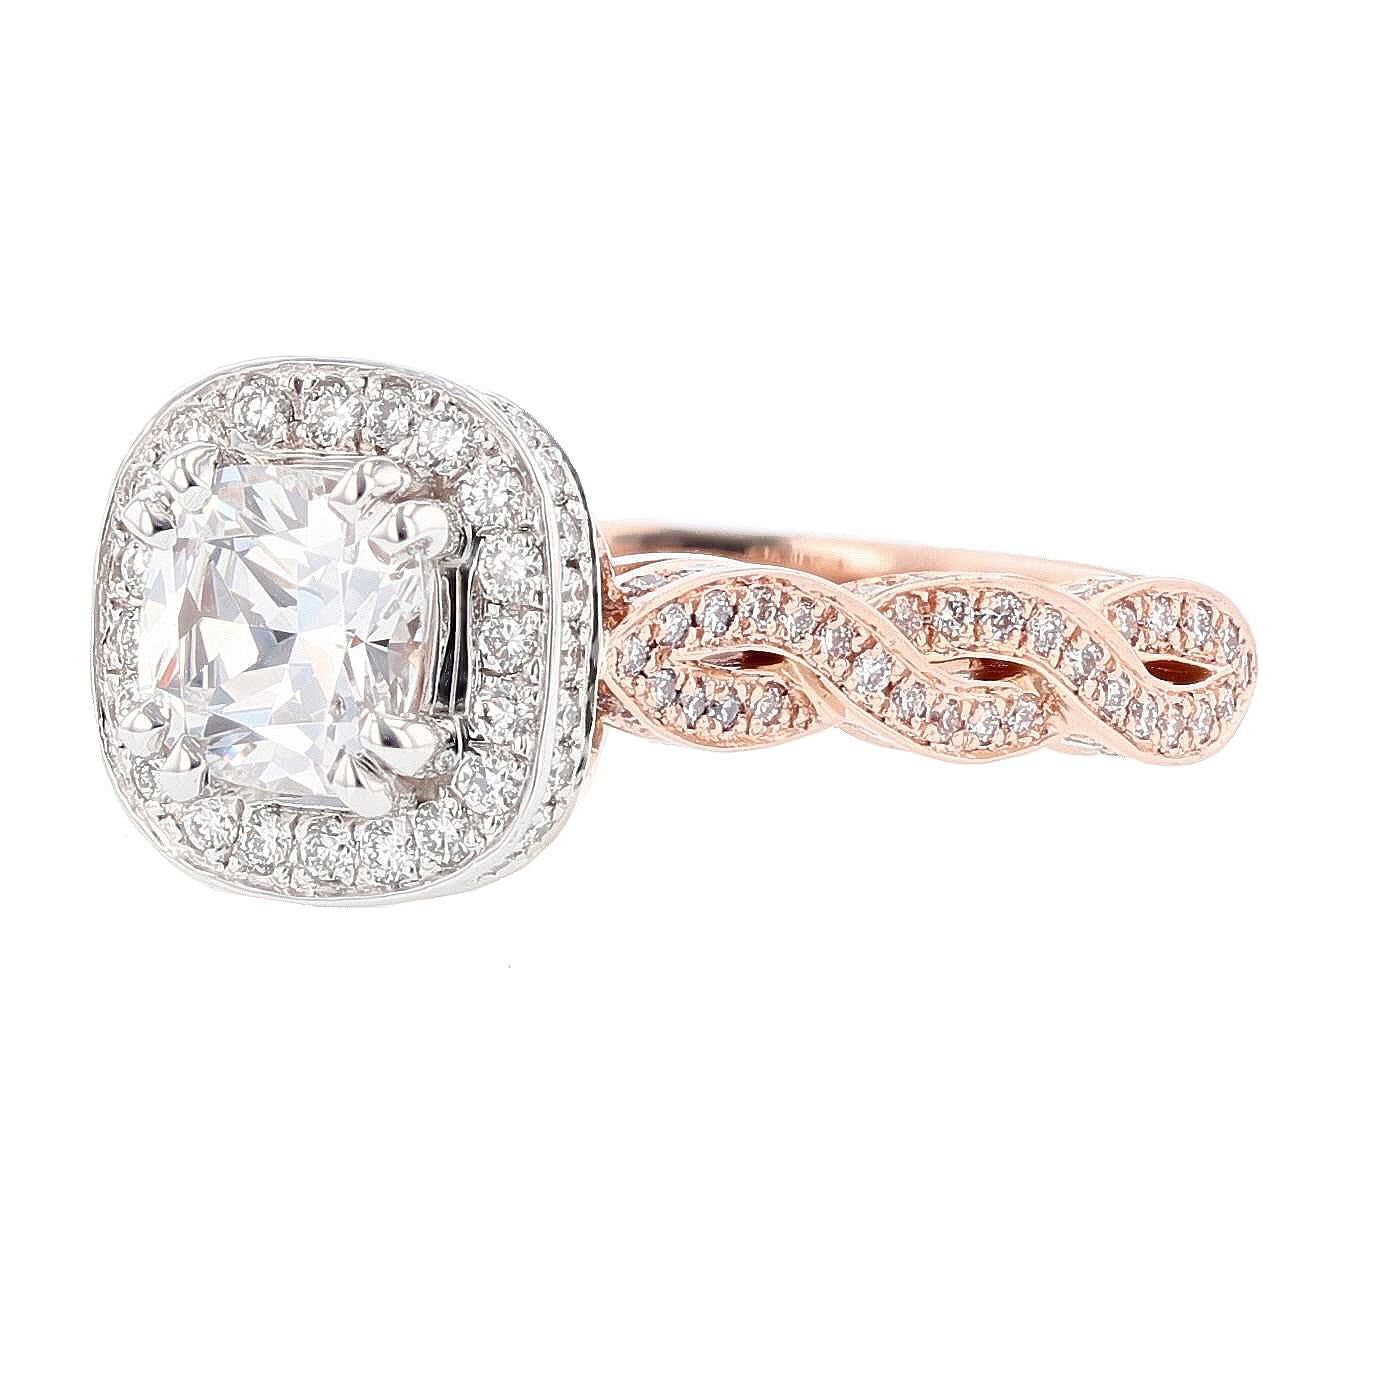 This ring is made in 14k white and rose gold and features a 1.00ct cushion cut diamond GIA certified color grade (F) clarity grade (SI2). The GIA certifcate is 